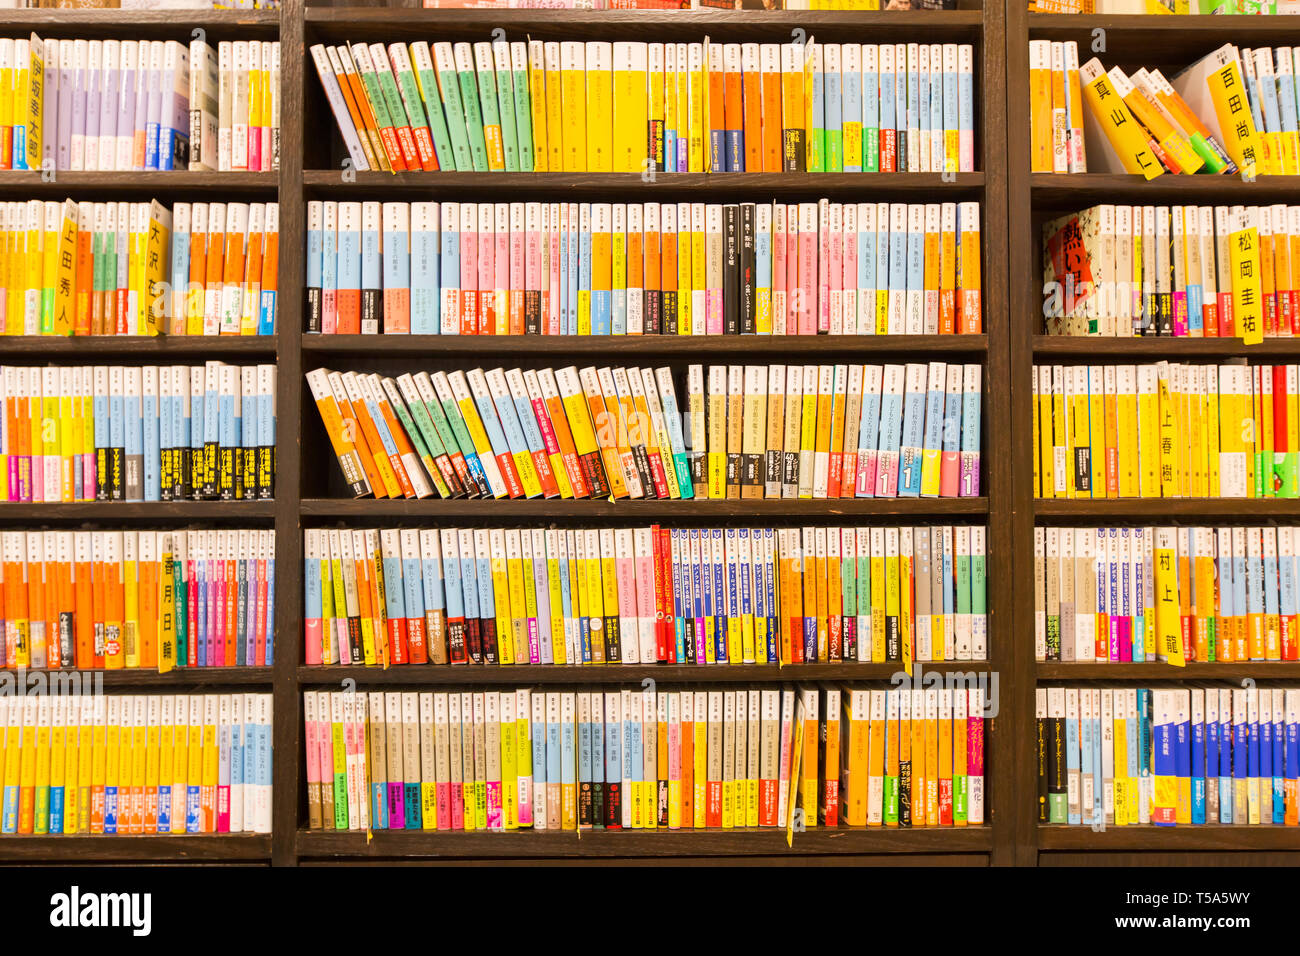 Rows of japanese books on shelves with warm ambience lighting. Stock Photo